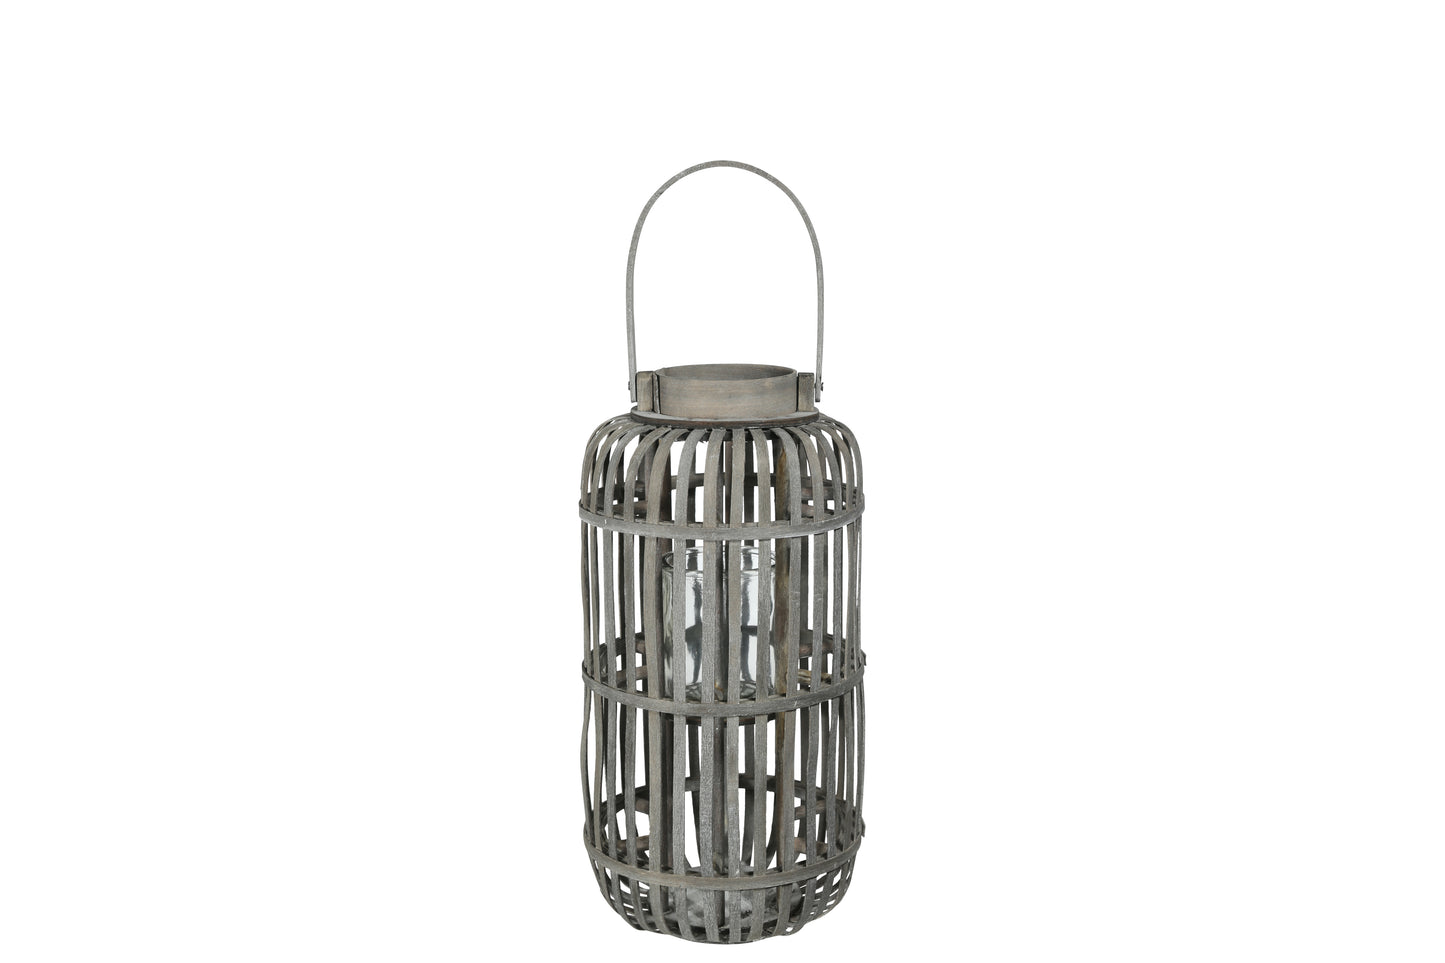 Wood Tall Round Lantern with Top Handle Lattice Design Body, Candle Glass Holder and Tapered Bottom